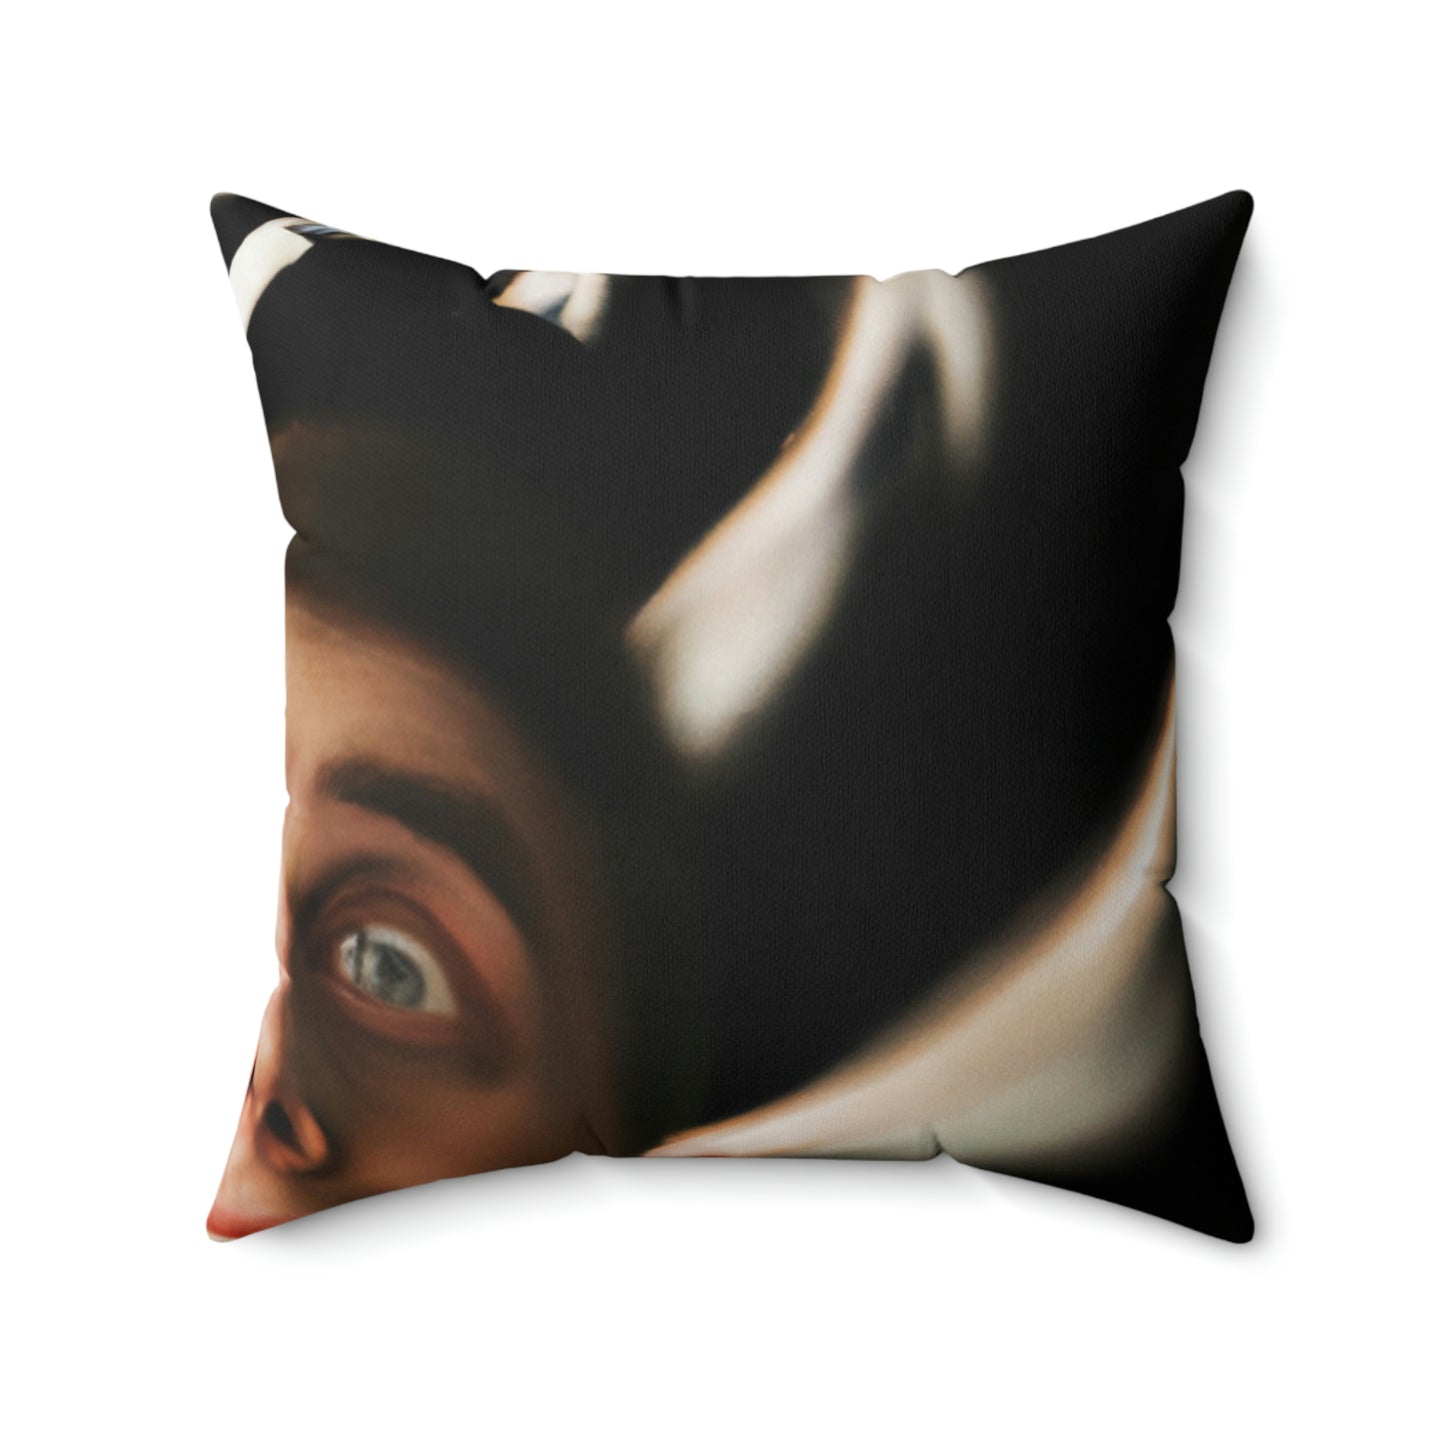 The Endless Nightmare - The Alien Square Pillow